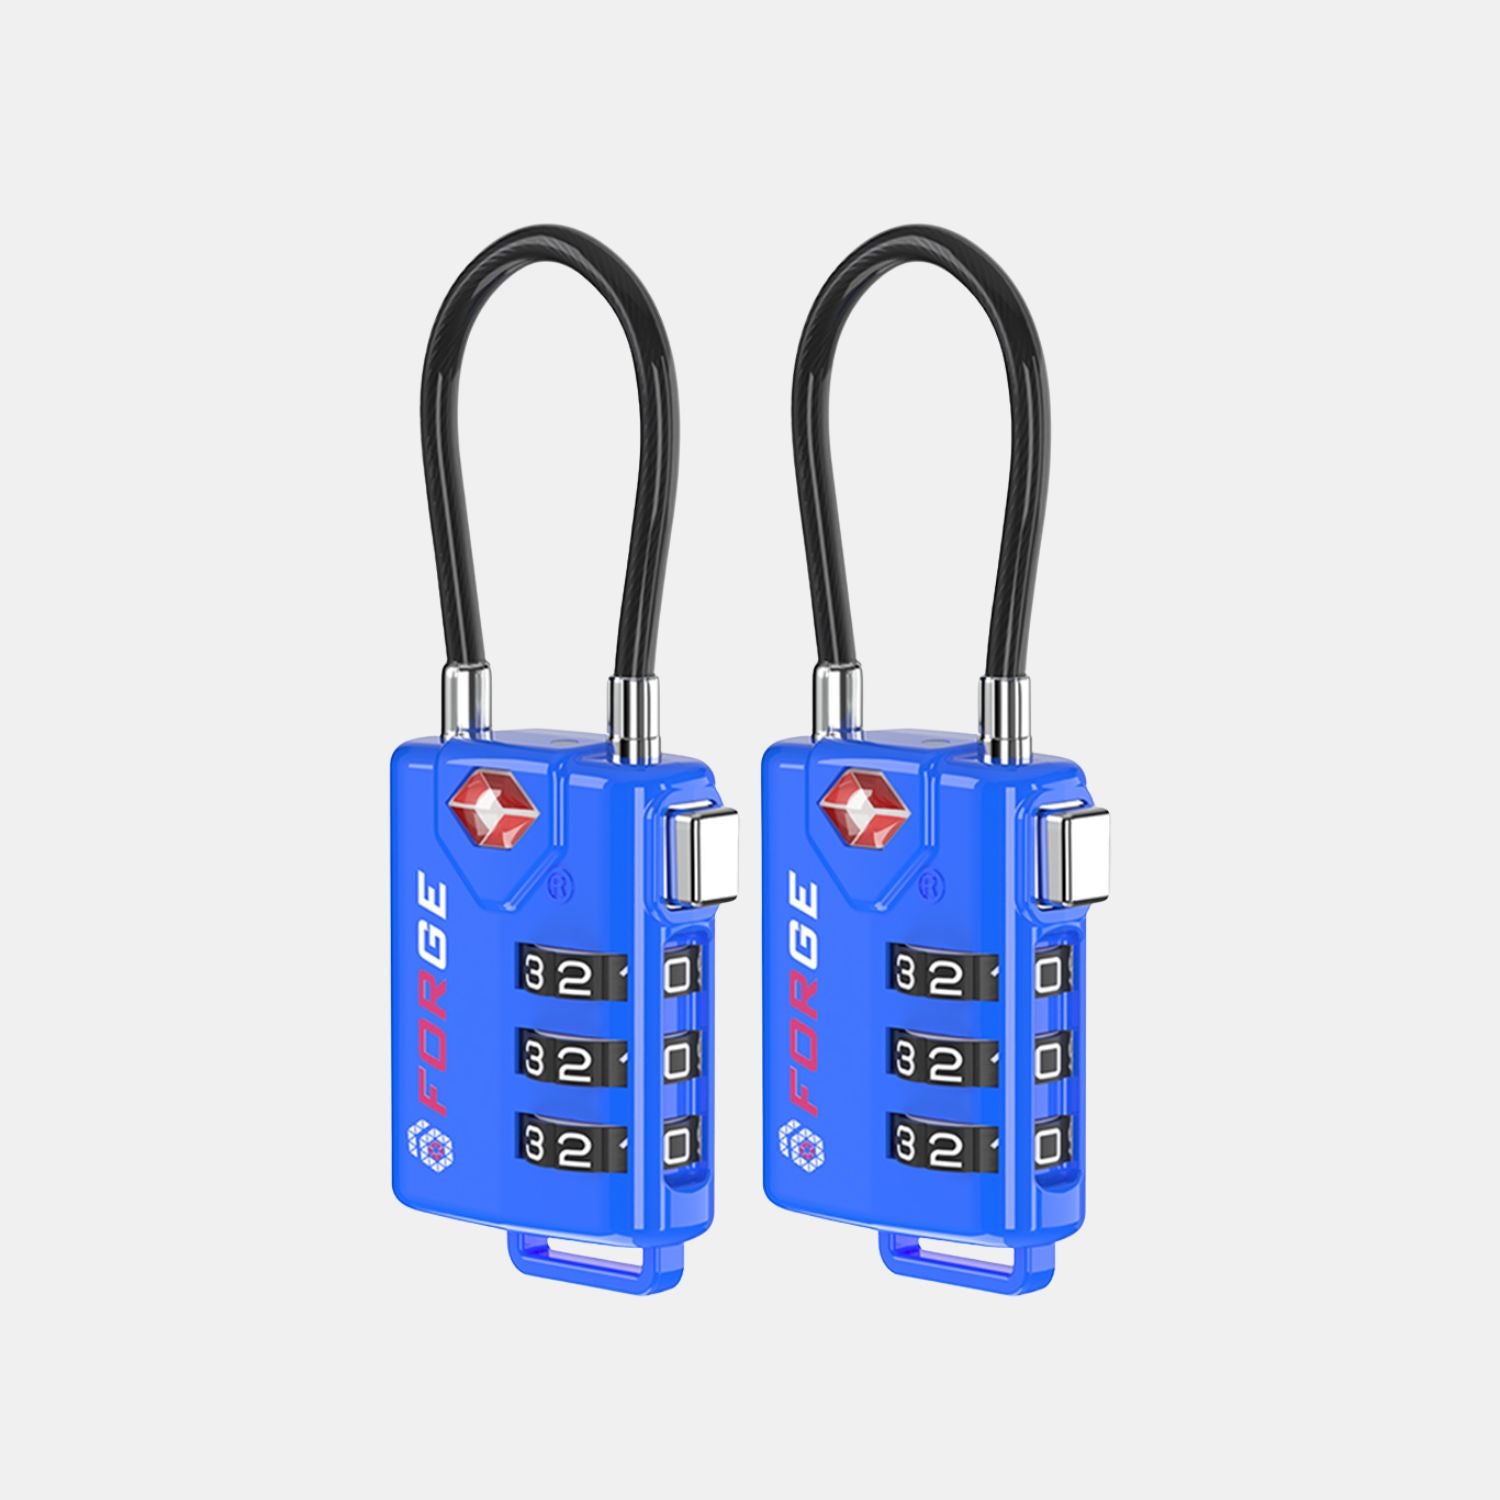 TSA Approved Cable Luggage Lock with Easy-to-Read Dials, Blue 4 Locks